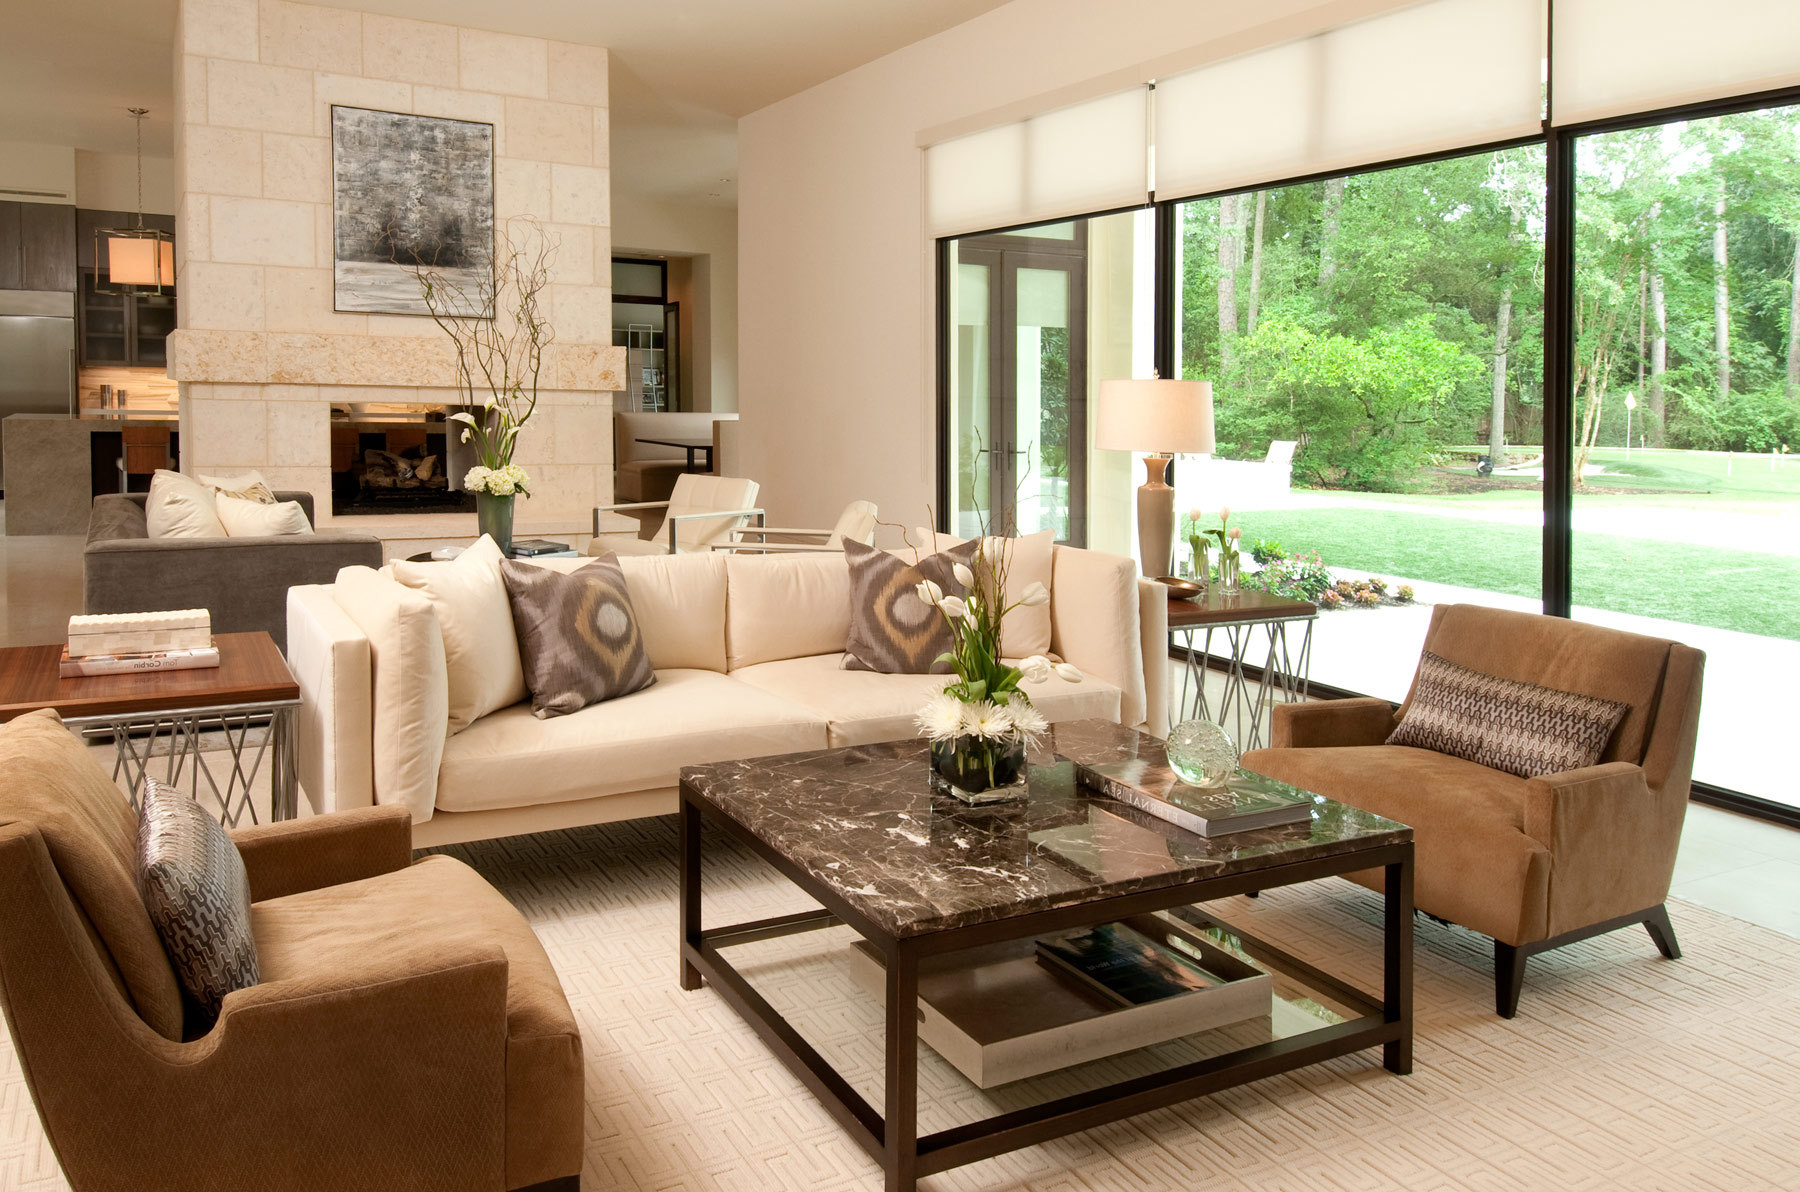 Living Room Interior Decorating: Create A Cozy And Inviting Atmosphere